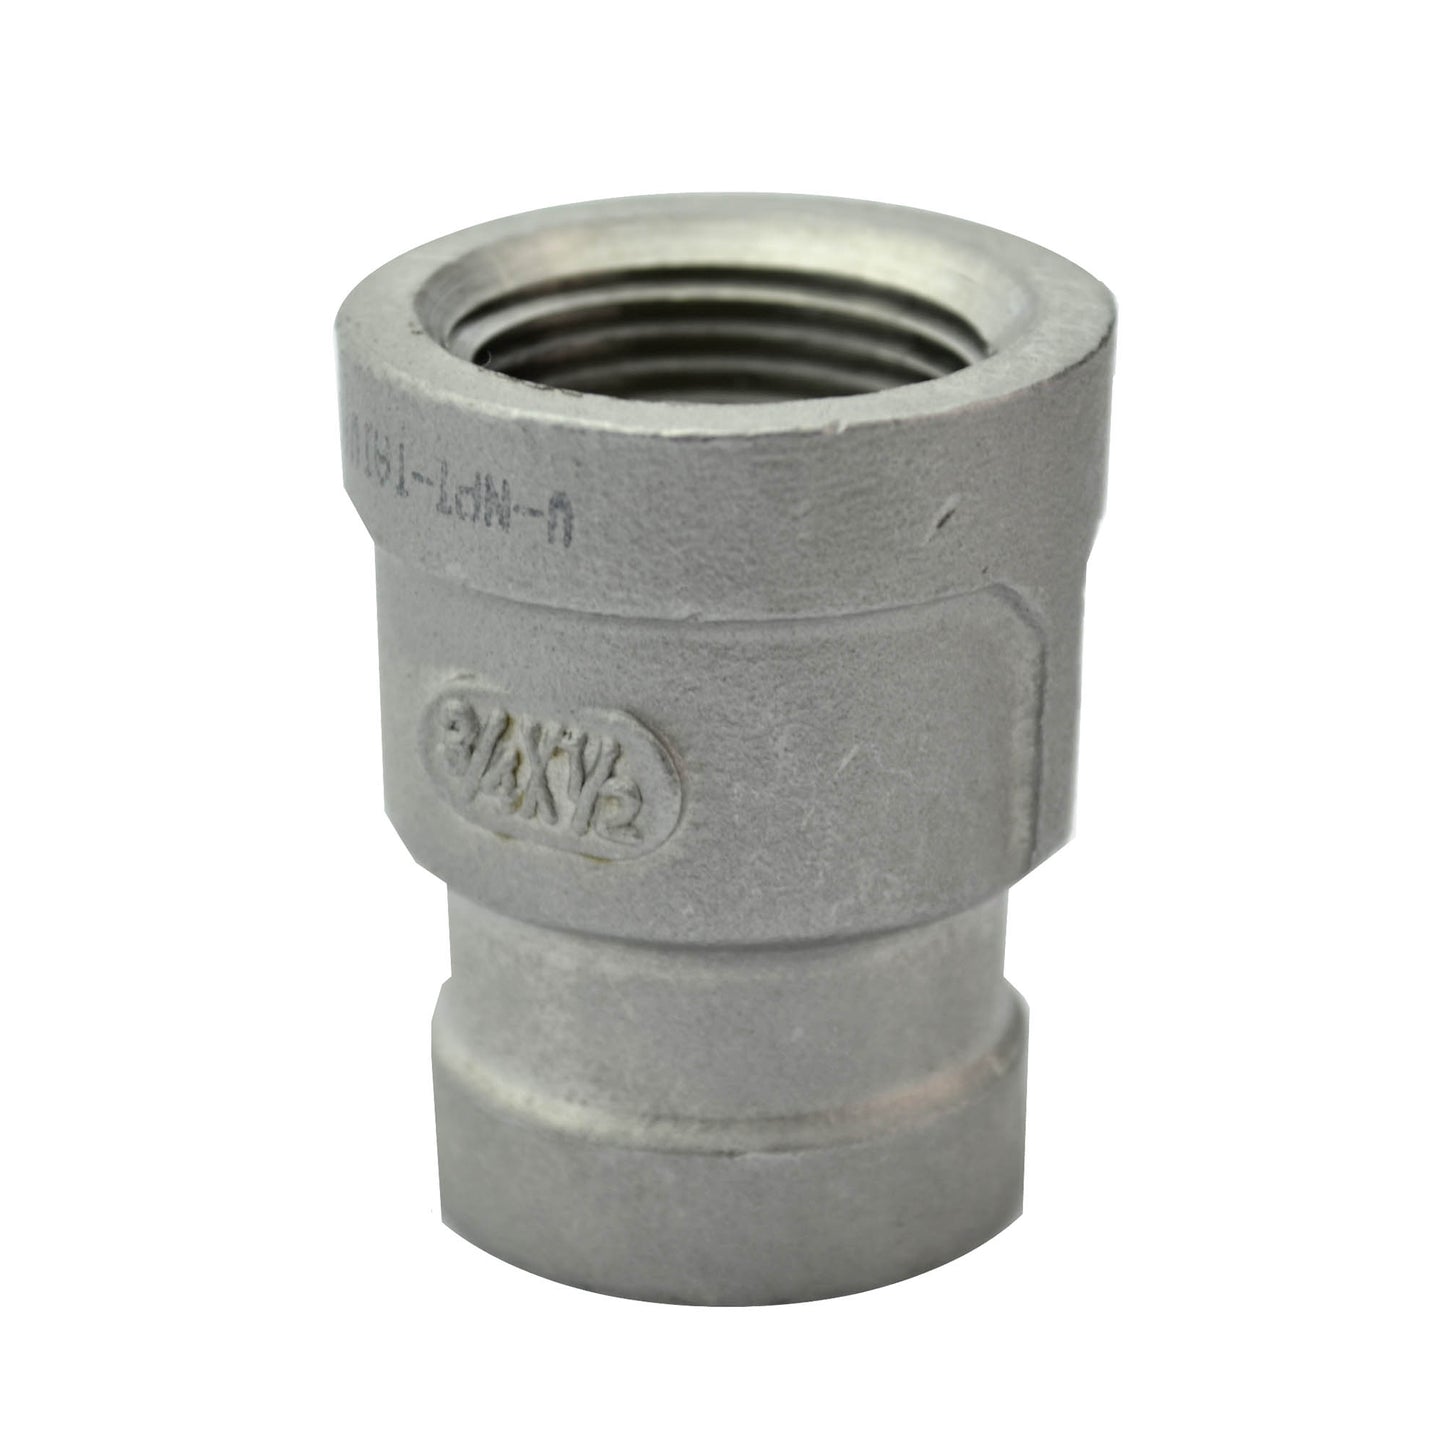 3/4" To 1/2" Bell Fitting - Stainless Steel Fitting